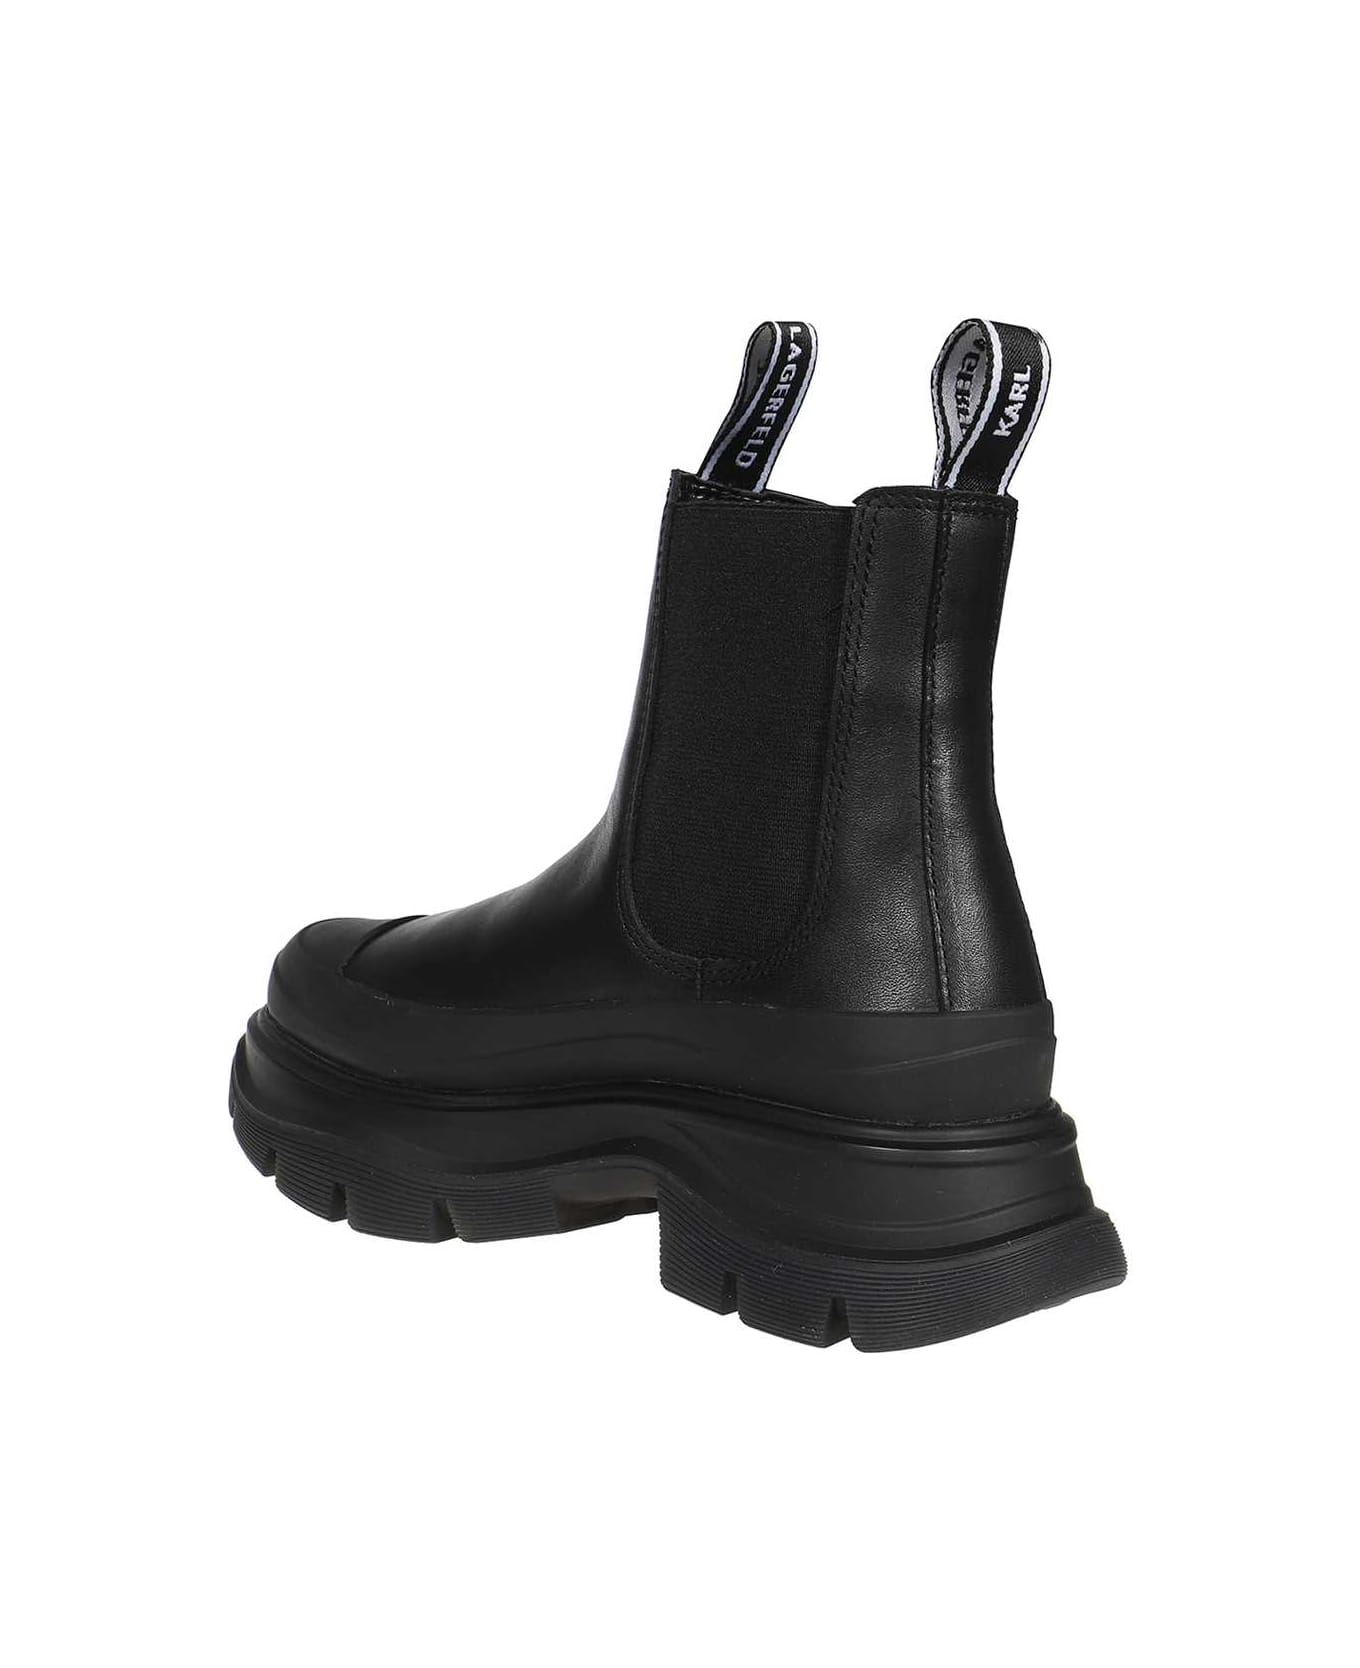 Karl Lagerfeld Leather Ankle Boots - black